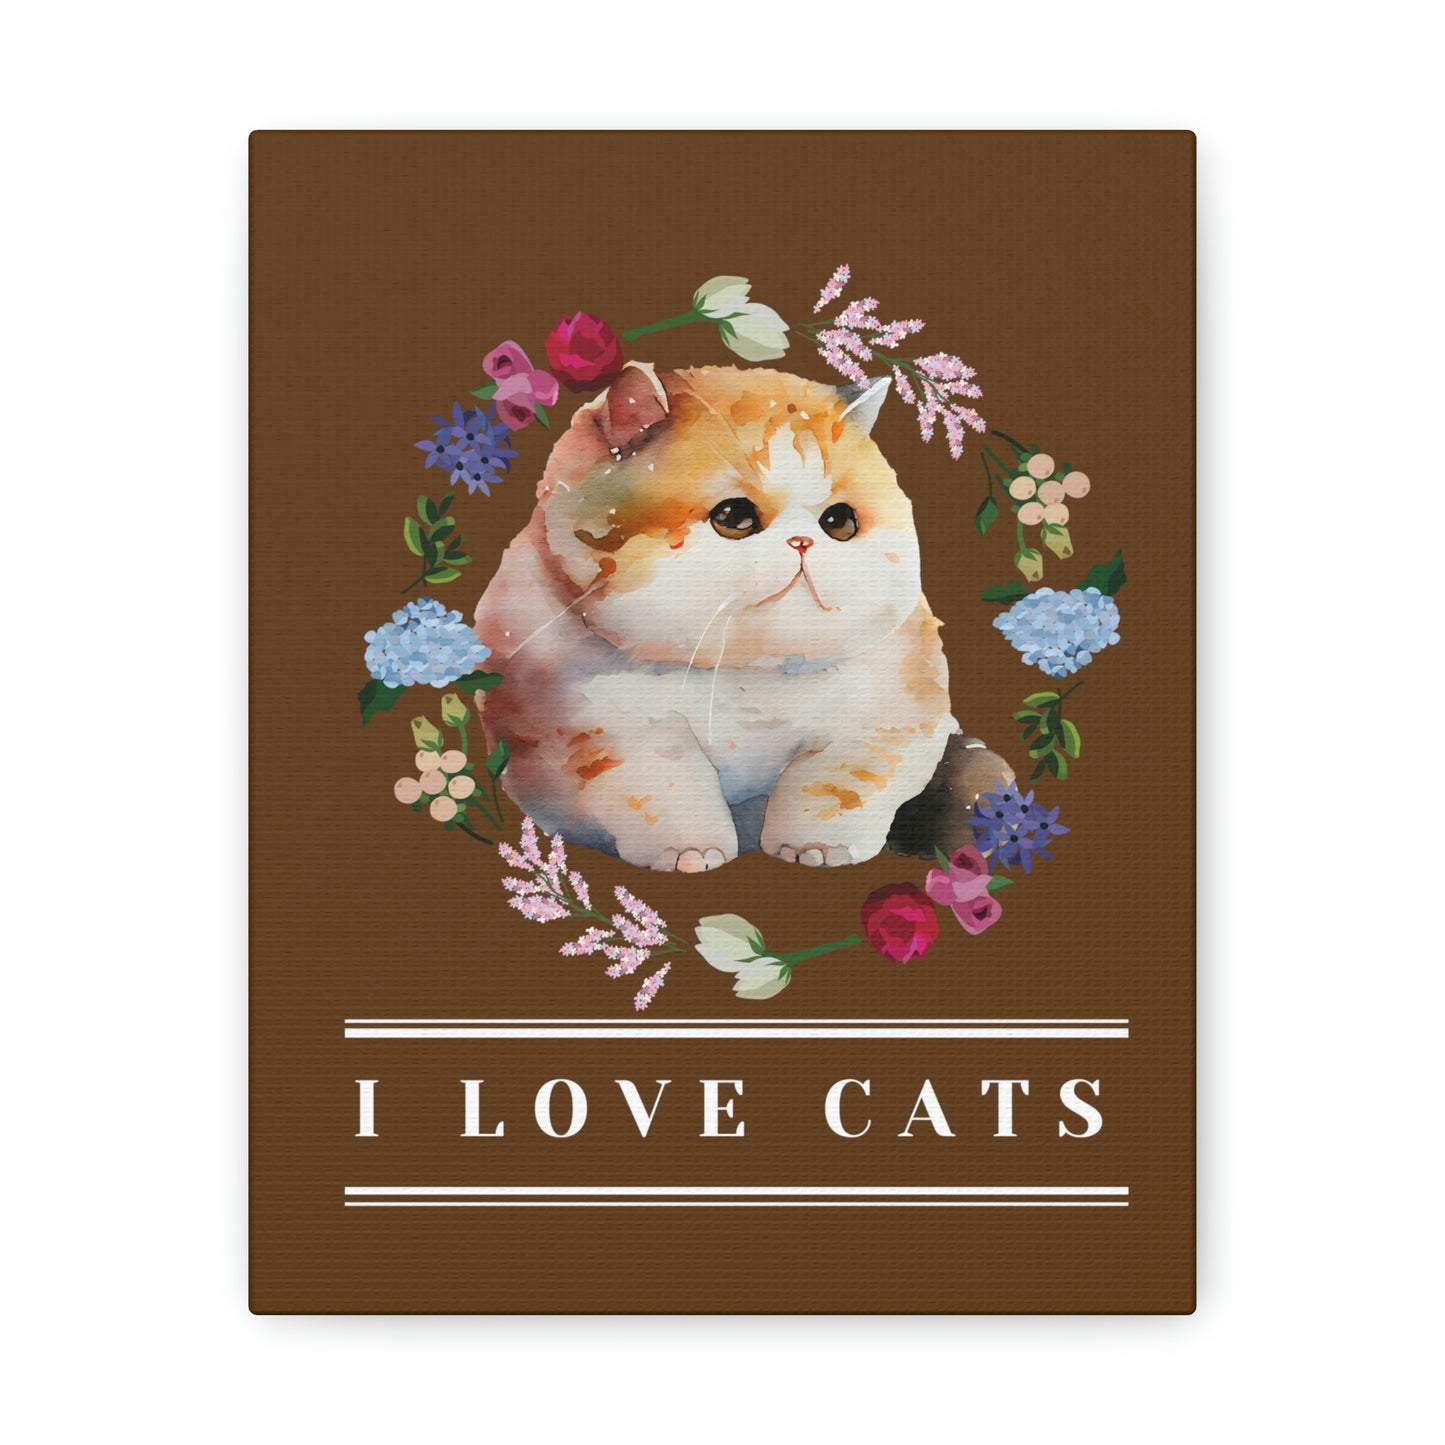 " I love cats " Chubby Cat design Canvas Gallery Wraps poster